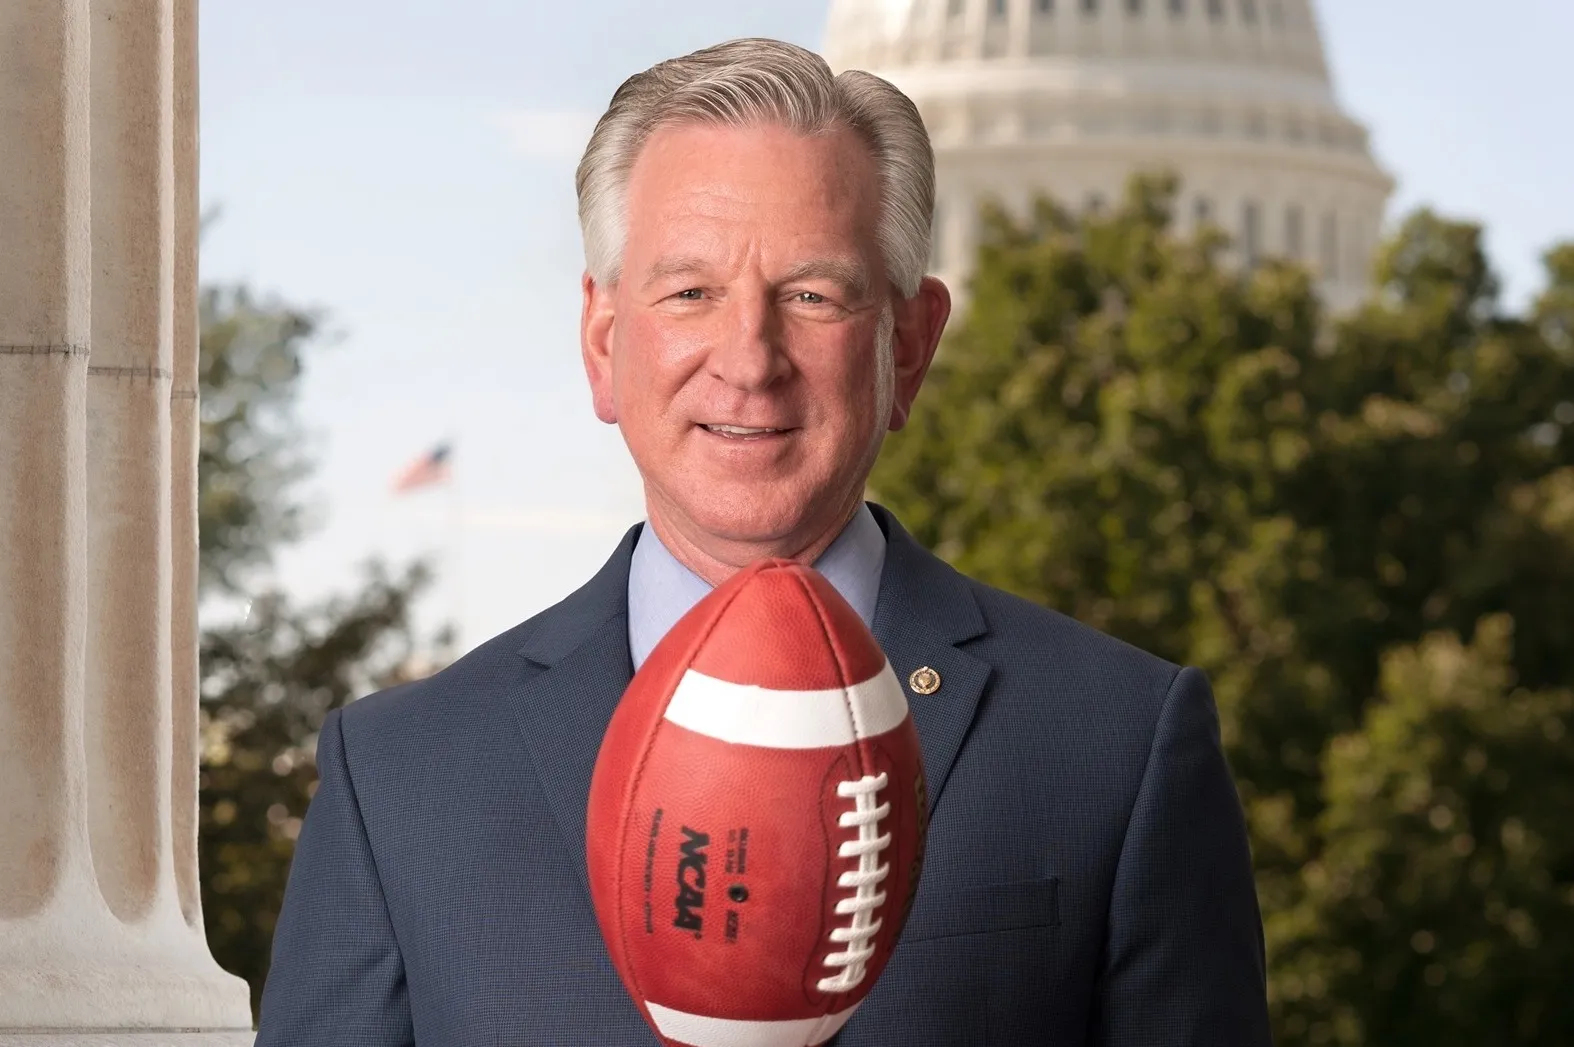 Sen. Tommy Tuberville of Alabama was elected to the U.S. Senate in 2020. He was the head coach of Auburn University's football team from 1999 to 2008.?w=200&h=150